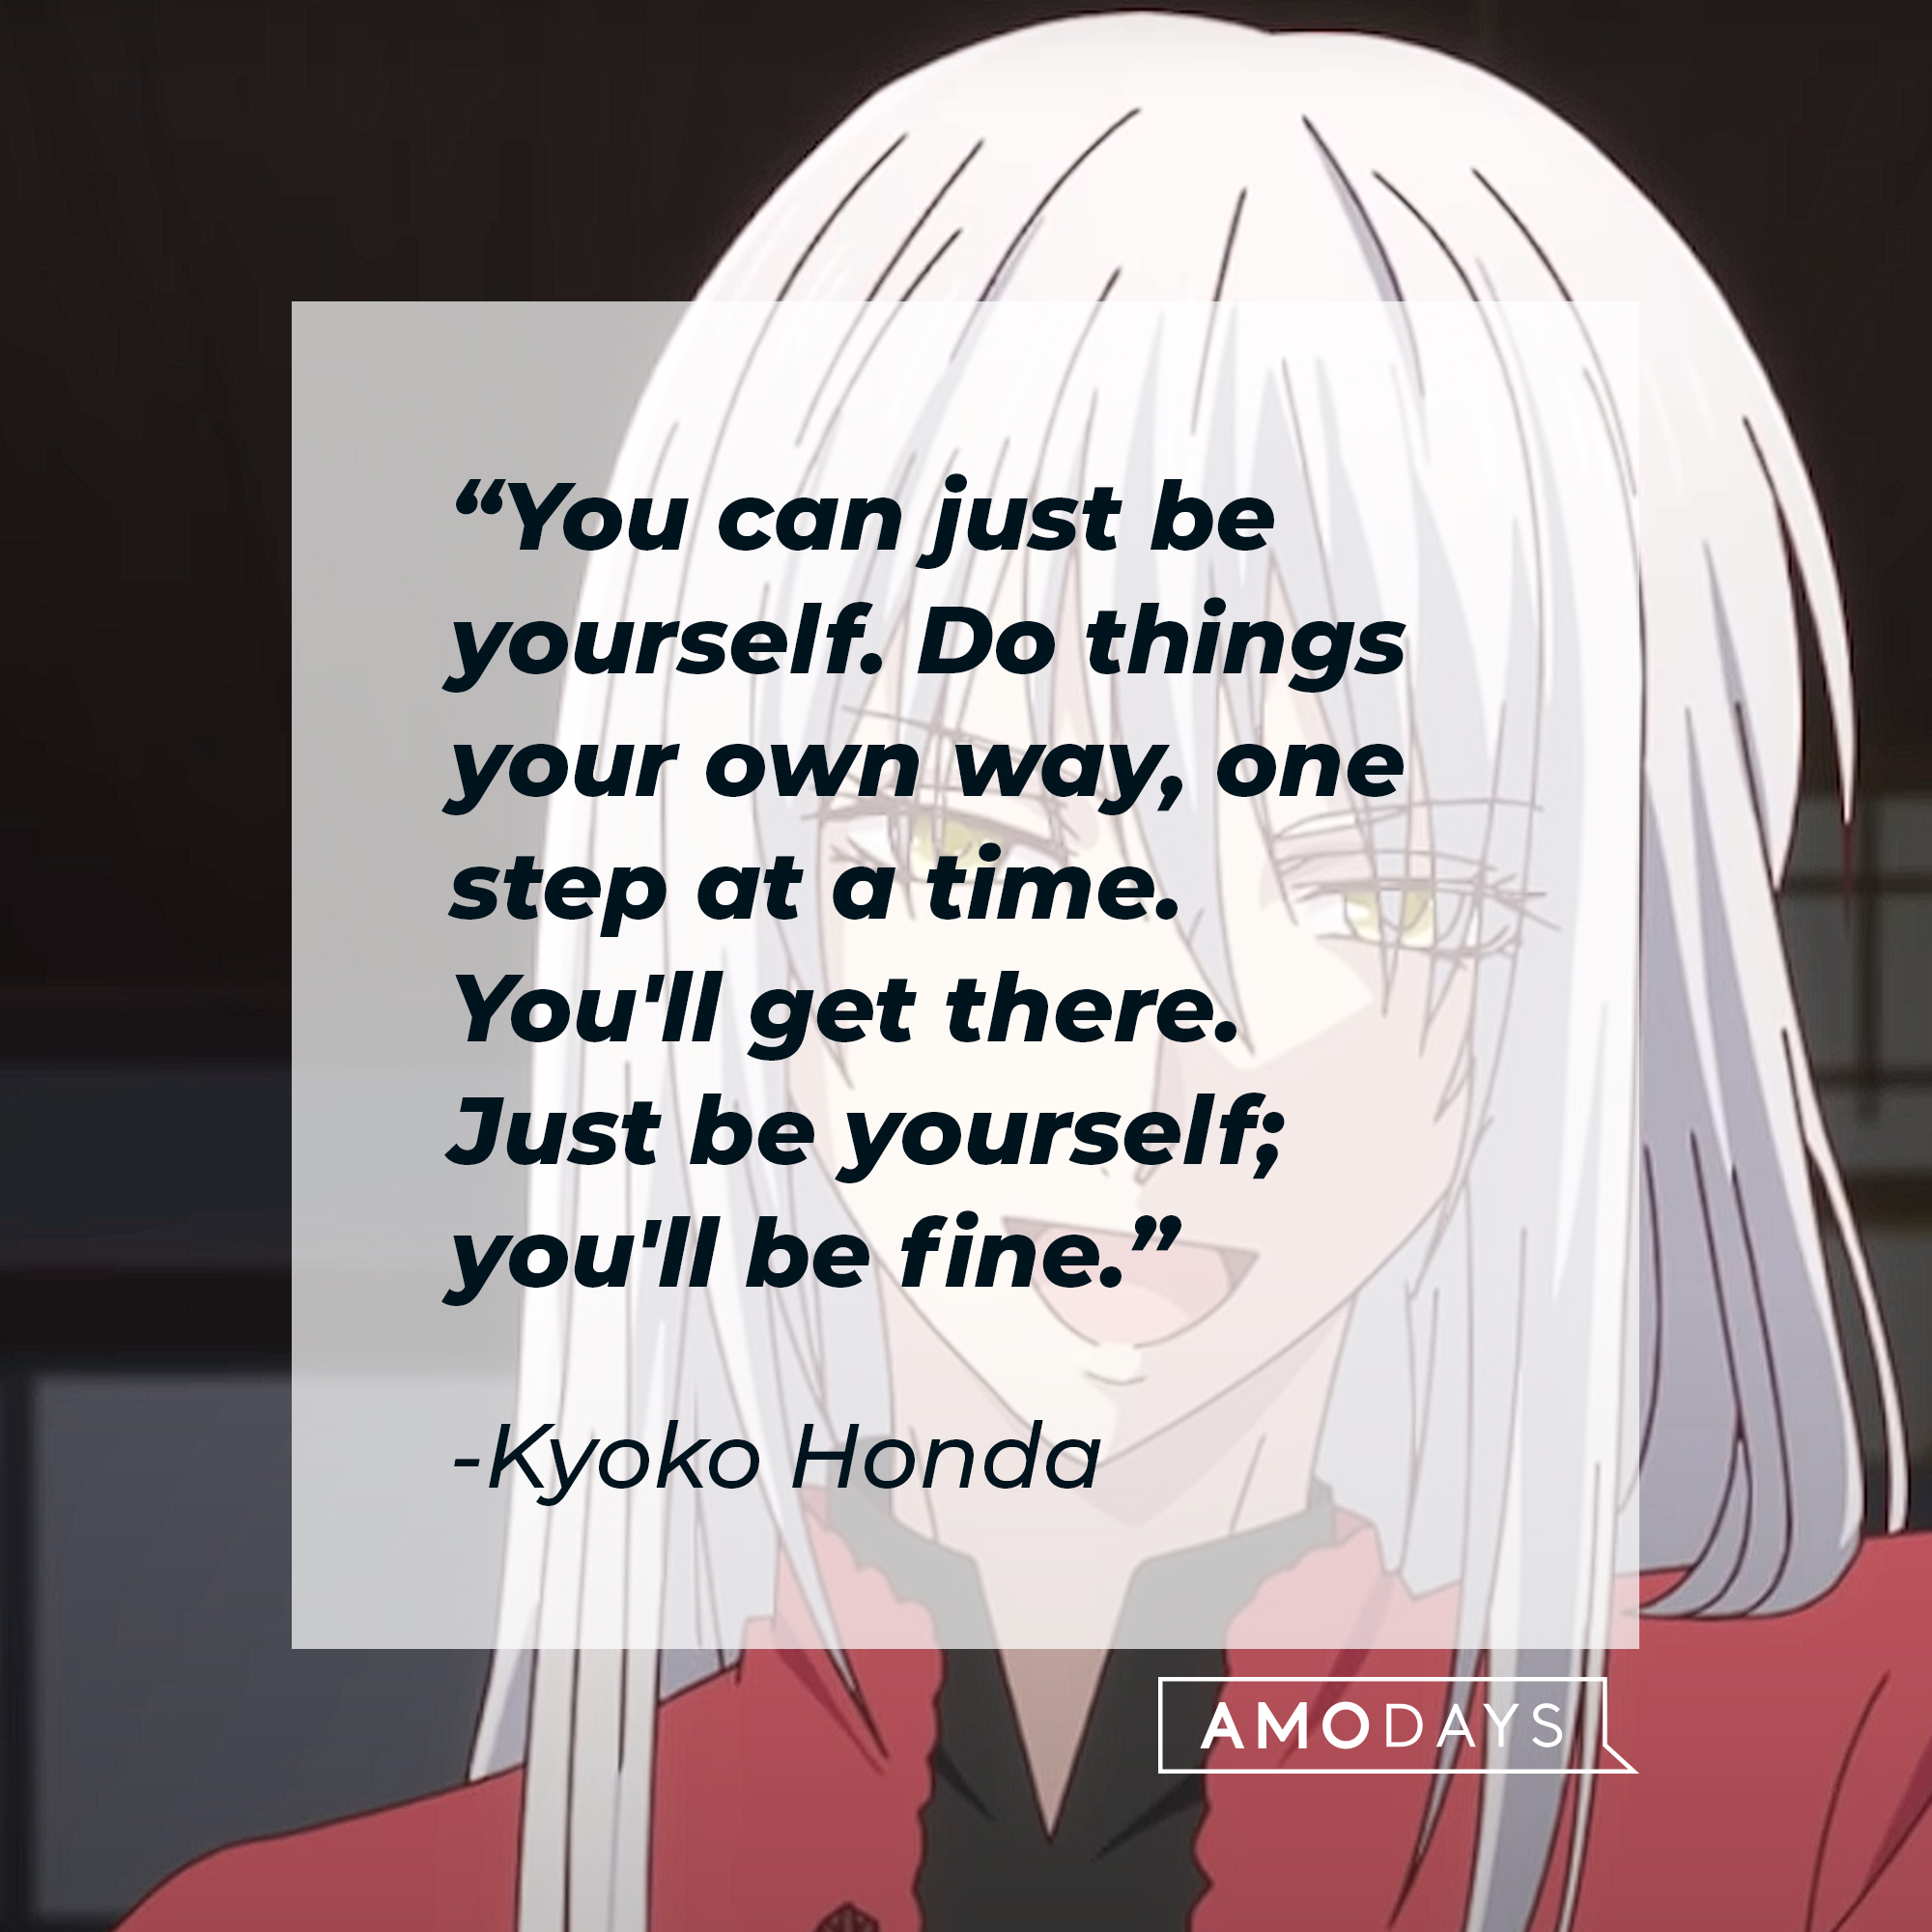 Kyoko Honda's quote: "You can just be yourself. Do things your own way, one step at a time. You'll get there. Just be yourself; you'll be fine." | Image: youtube.com/Crunchyroll Collection